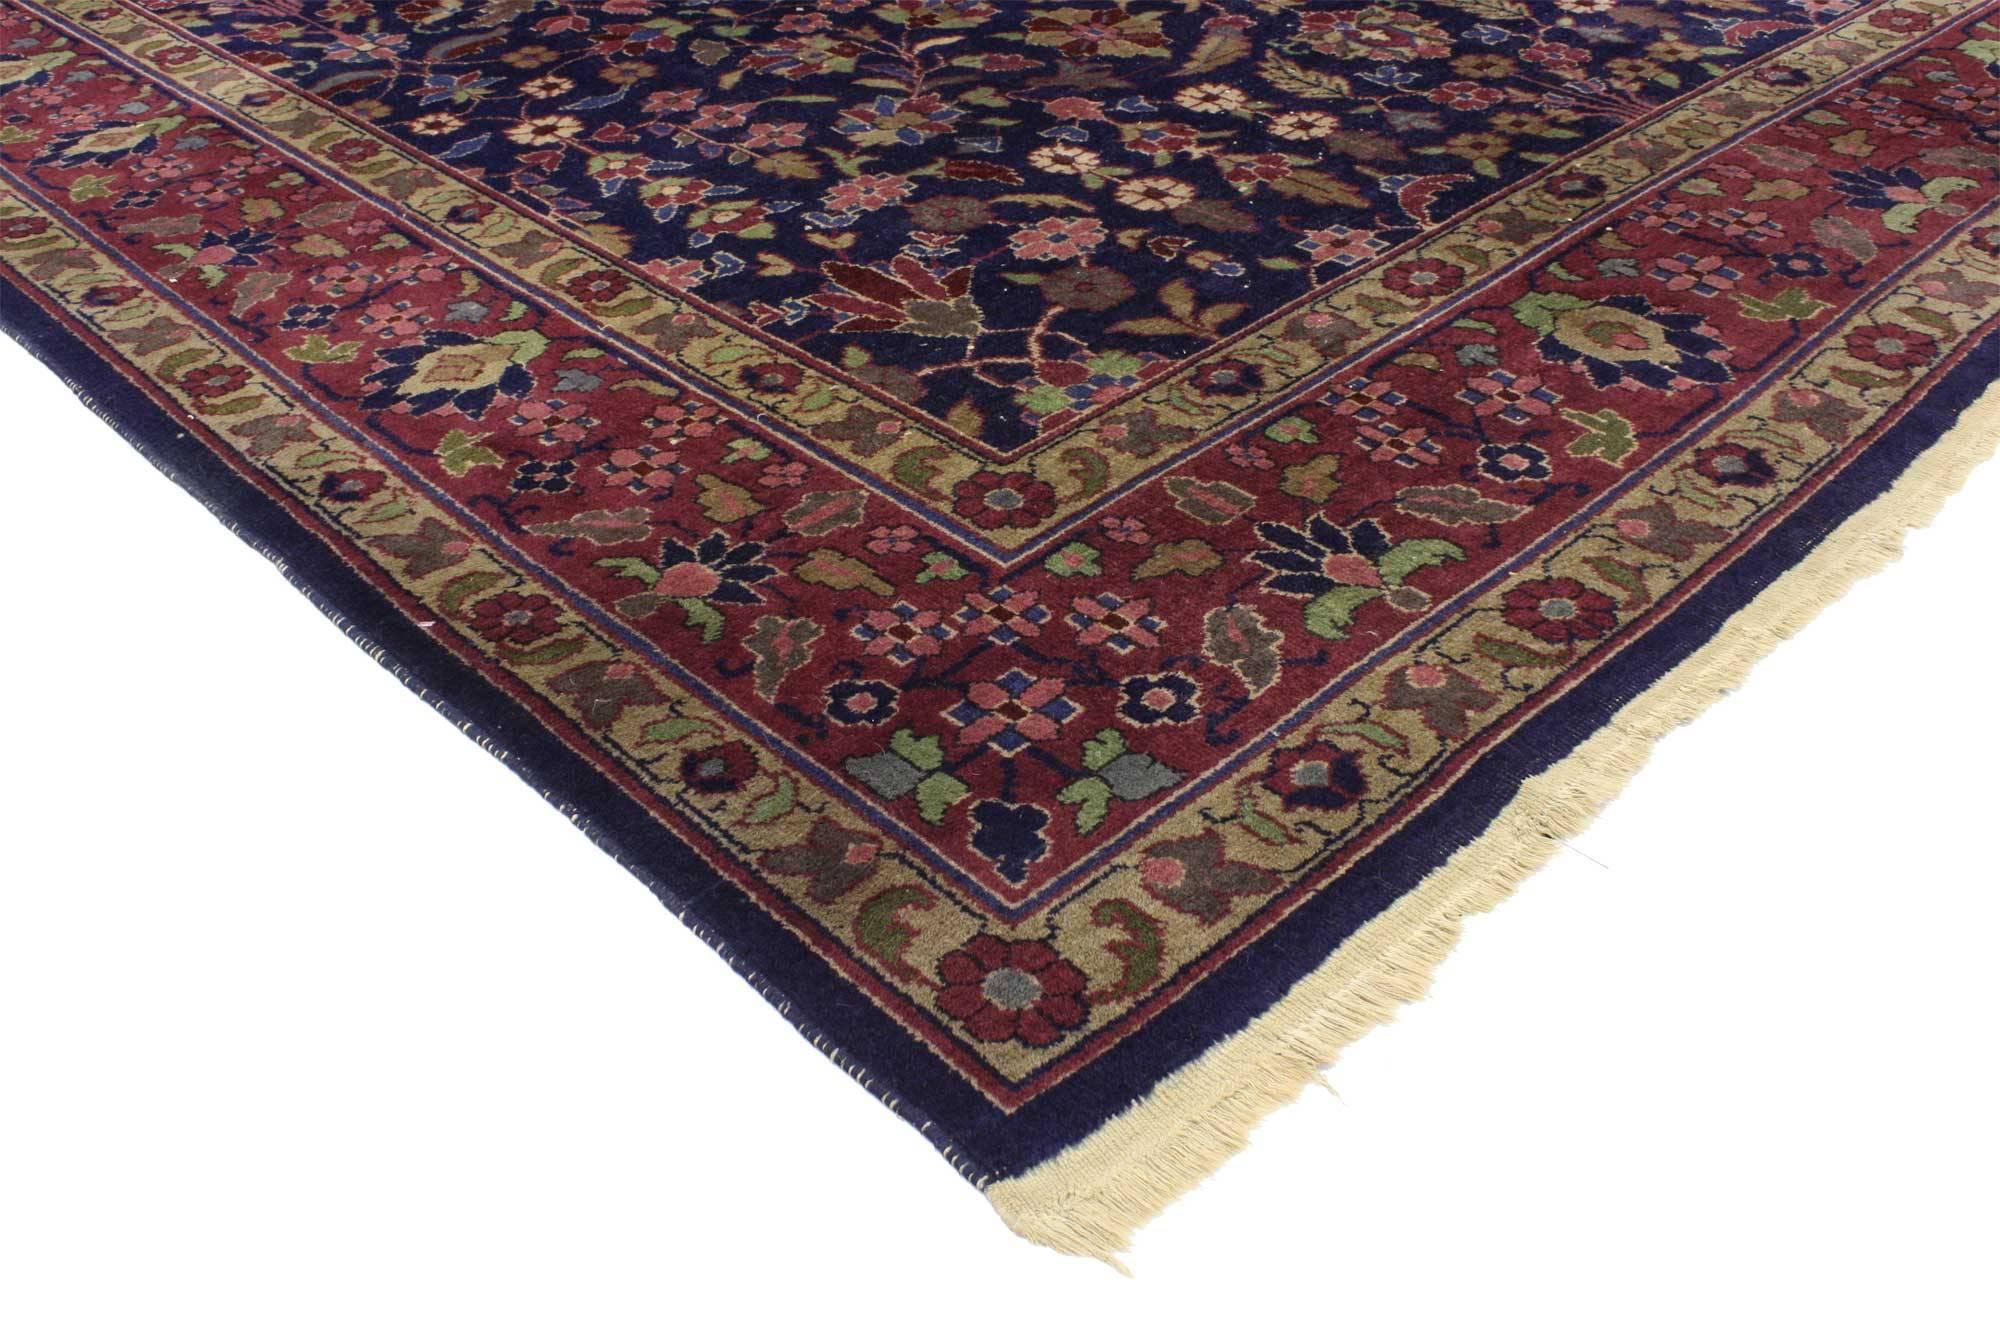 76739, antique Indian Area rug with Modern Victorian style. Rich in color, texture and beguiling ambiance, this antique Indian rug features a lavish floral pattern composed of rosettes, lilies, palmettes, cypress trees, star flowers, hyacinths,